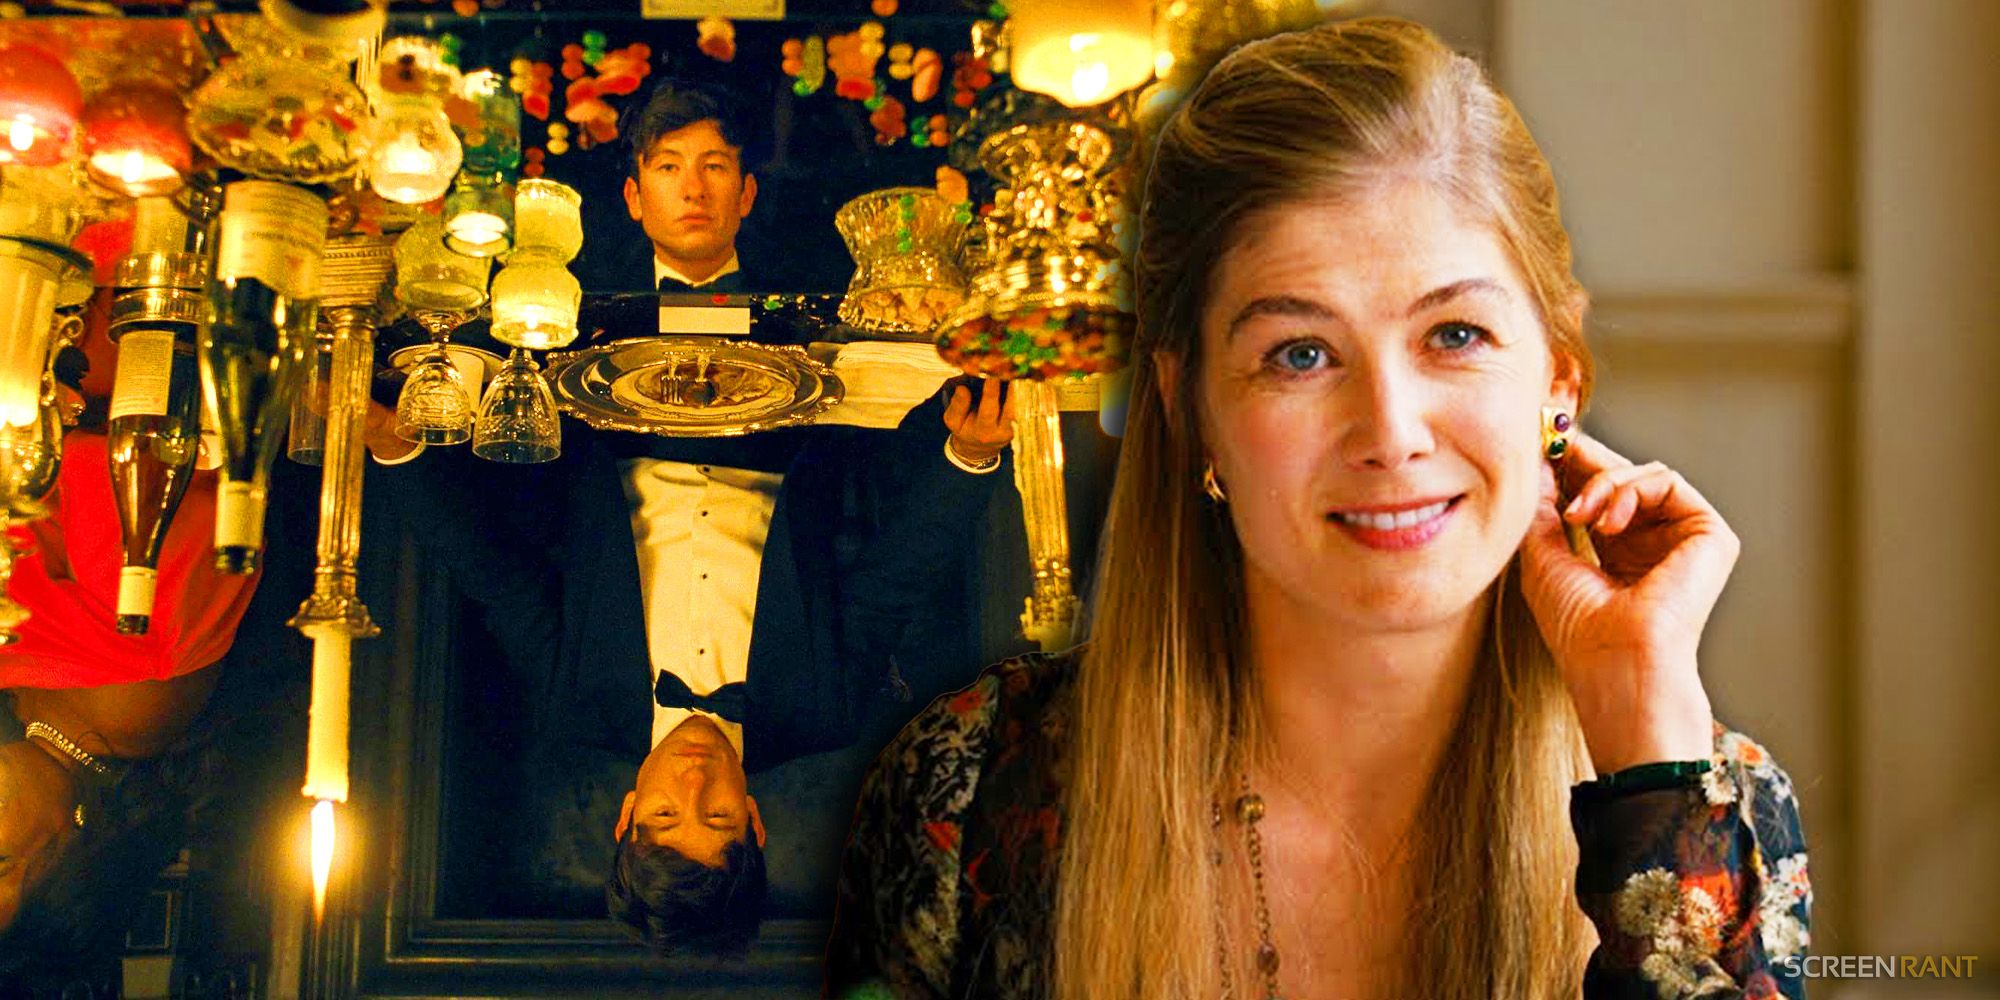 Barry Keoghan as Oliver reflected at an opulent dinner table and Rosamund Pike as Lady Elspeth in a floral dress from Saltburn